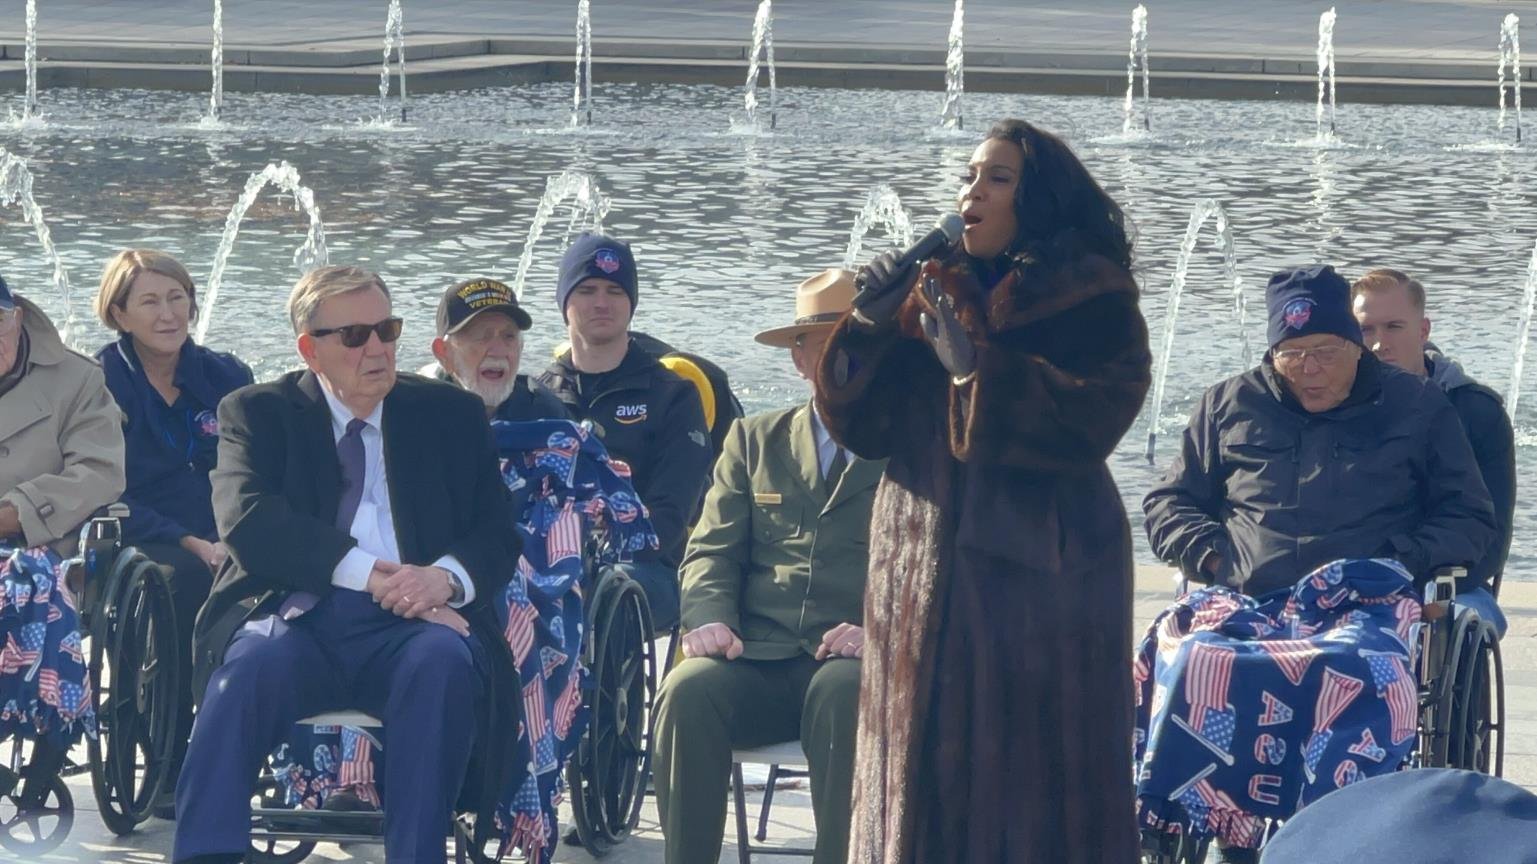 December 7, 2021, Mary was the featured entertainment performing a special tribute to America’s WWII veterans at the Pearl Harbor 80th Anniversary Commemoration